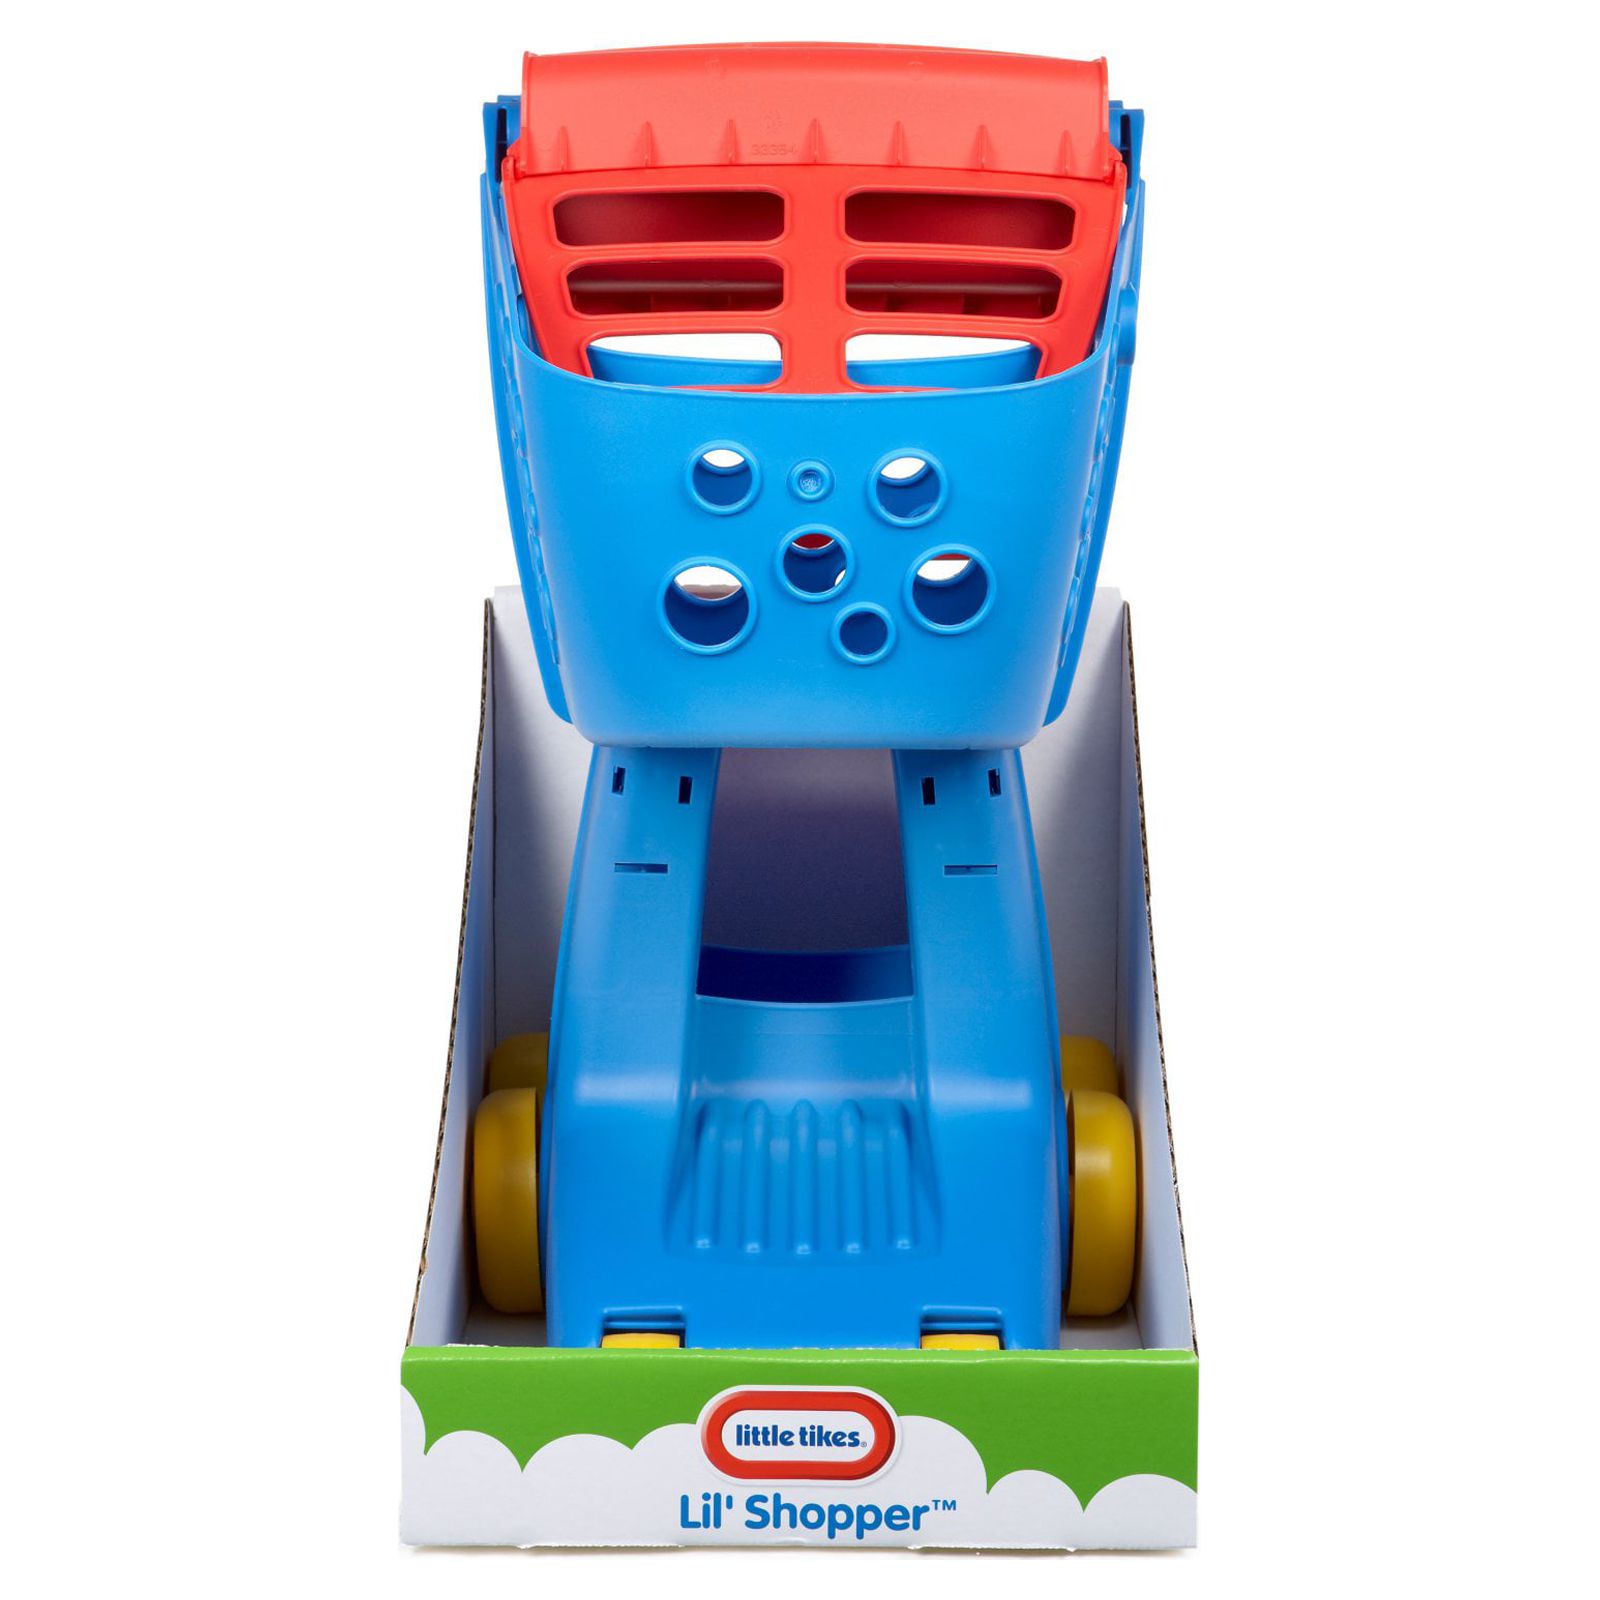 Little Tikes Lil Shopper - Blue For Girls and Boys Ages 1 Year + - image 3 of 5